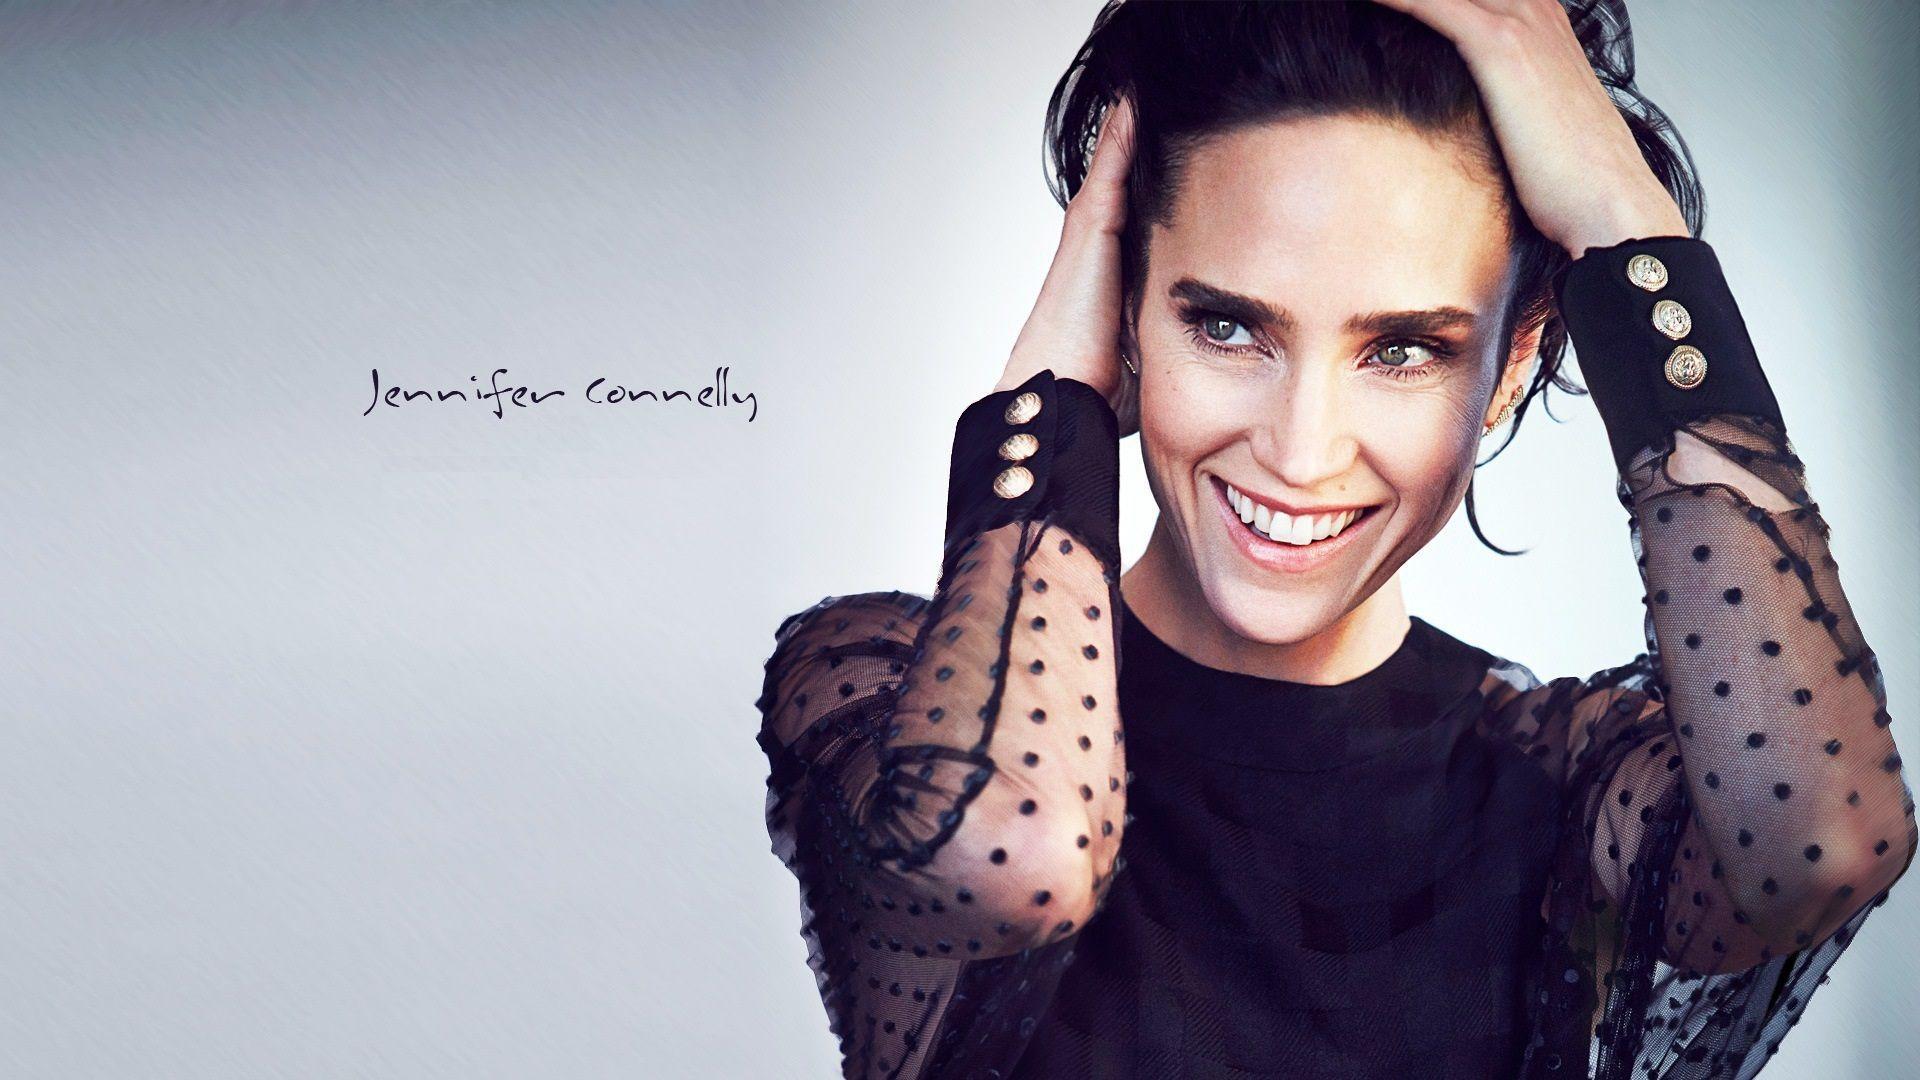 Jennifer Connelly Wallpaper Image Photo Picture Background